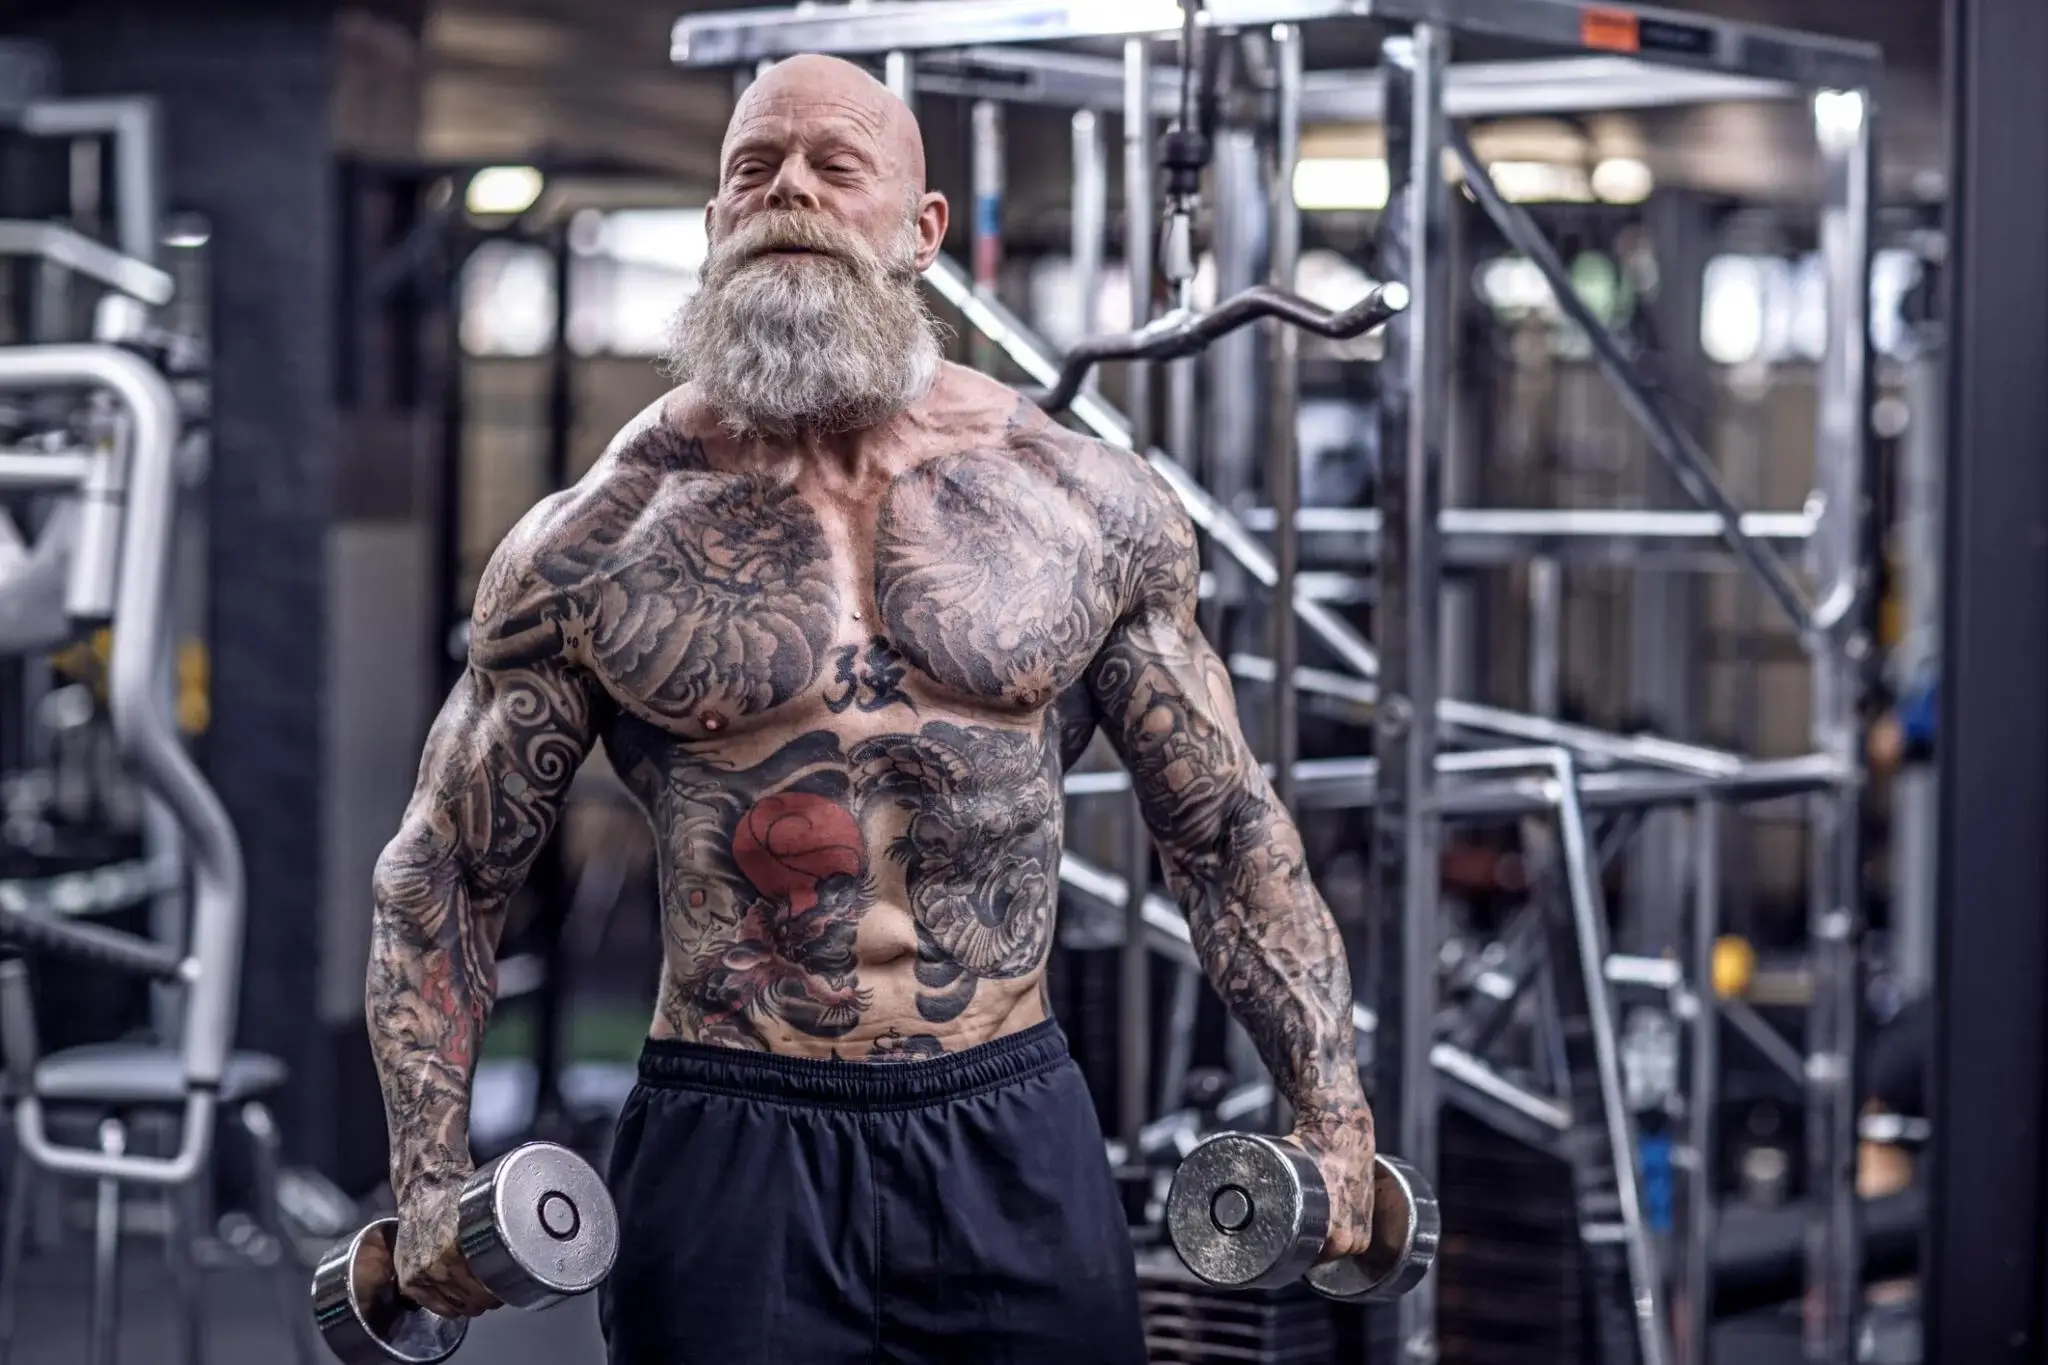 10 Tips For Safely Working Out After a Tattoo